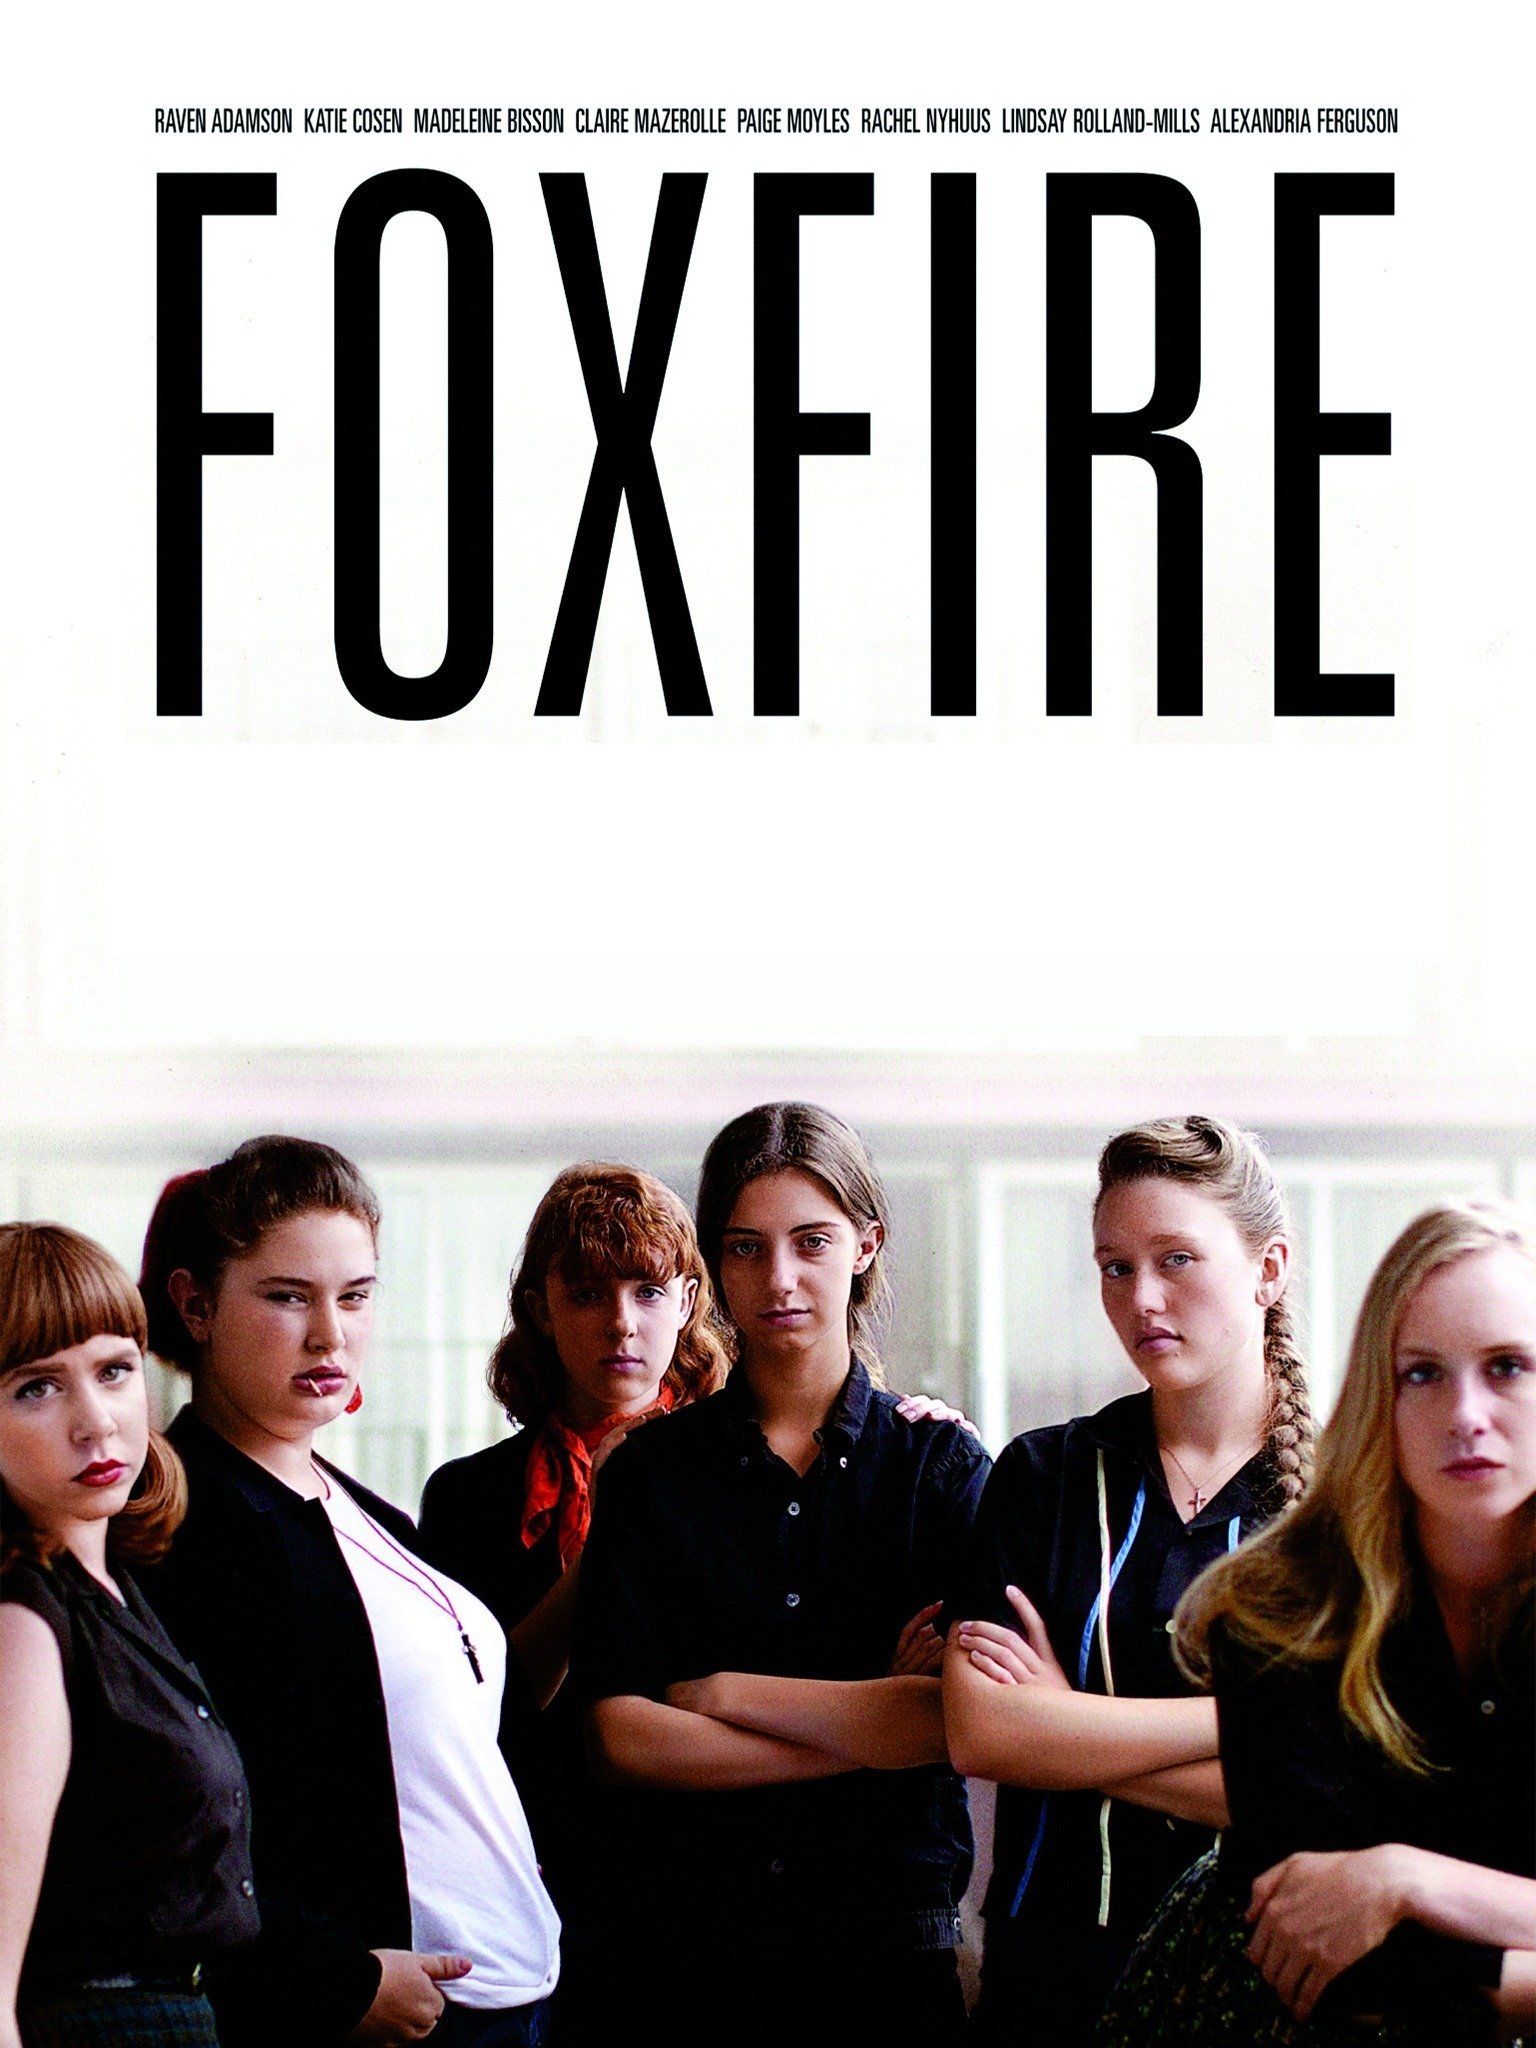 foxfire email